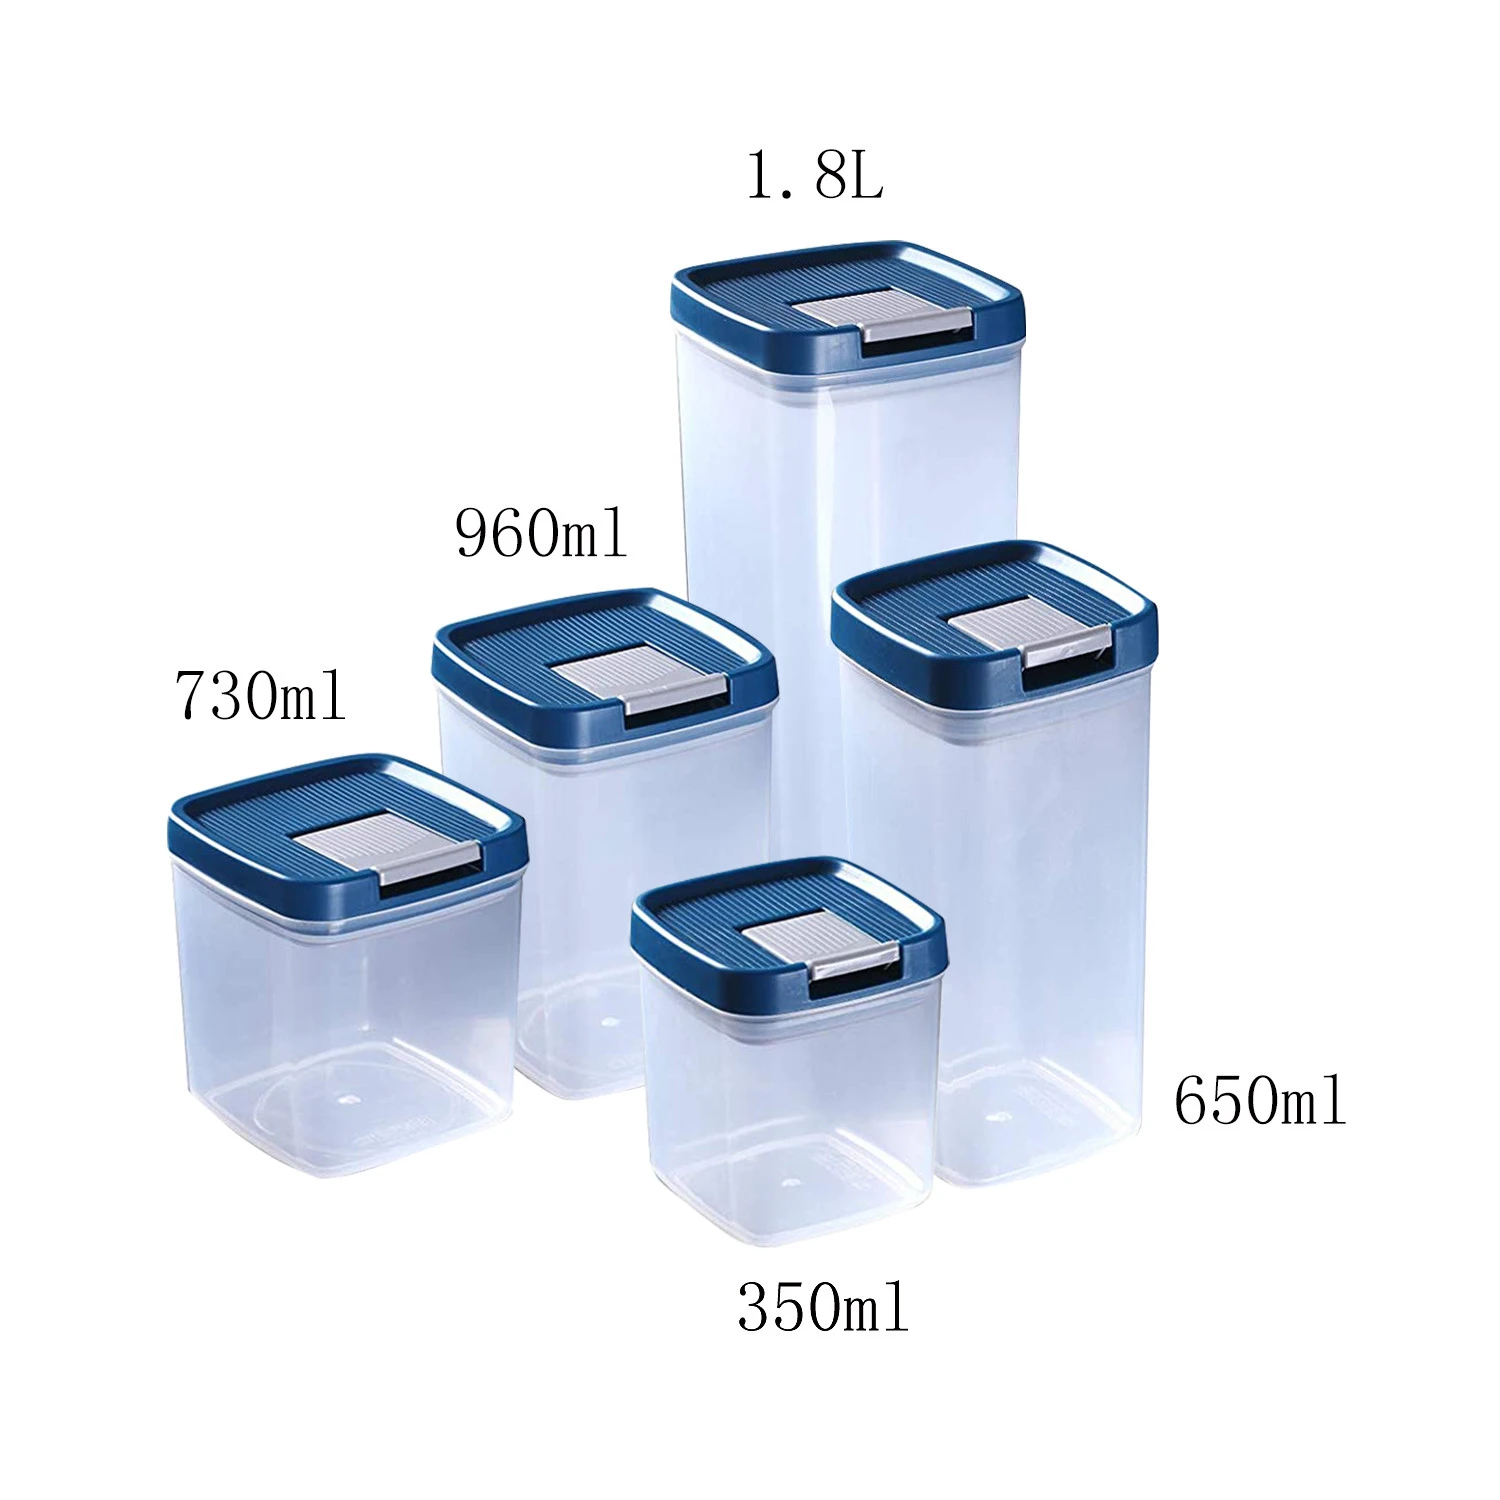 Space Saver Kitchen Pantry Organization Airtight Food Storage Containers Set Cereal and Dry Food Plastic clear kitchen food box